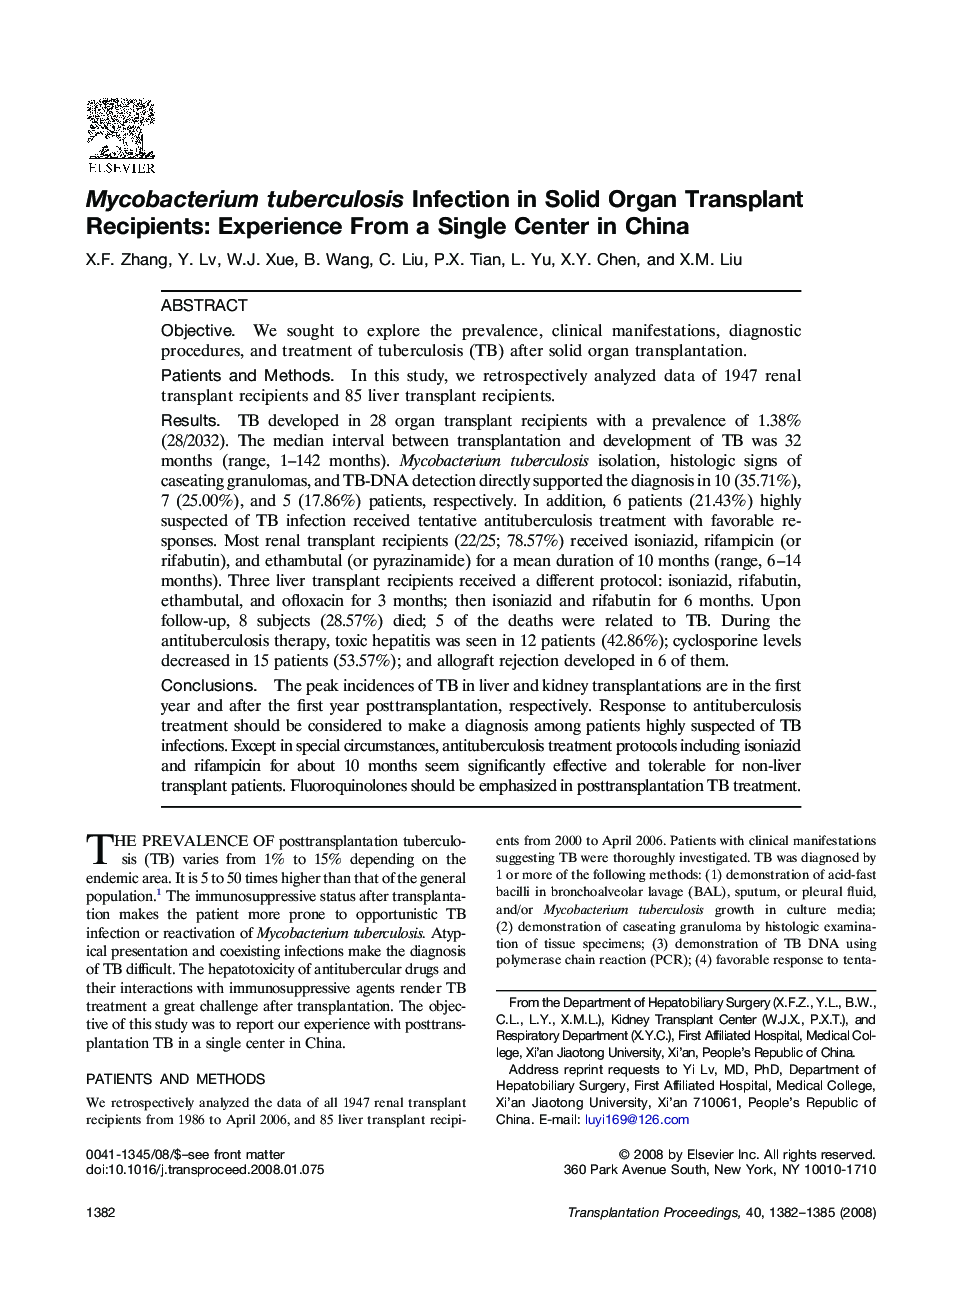 Mycobacterium tuberculosis Infection in Solid Organ Transplant Recipients: Experience From a Single Center in China